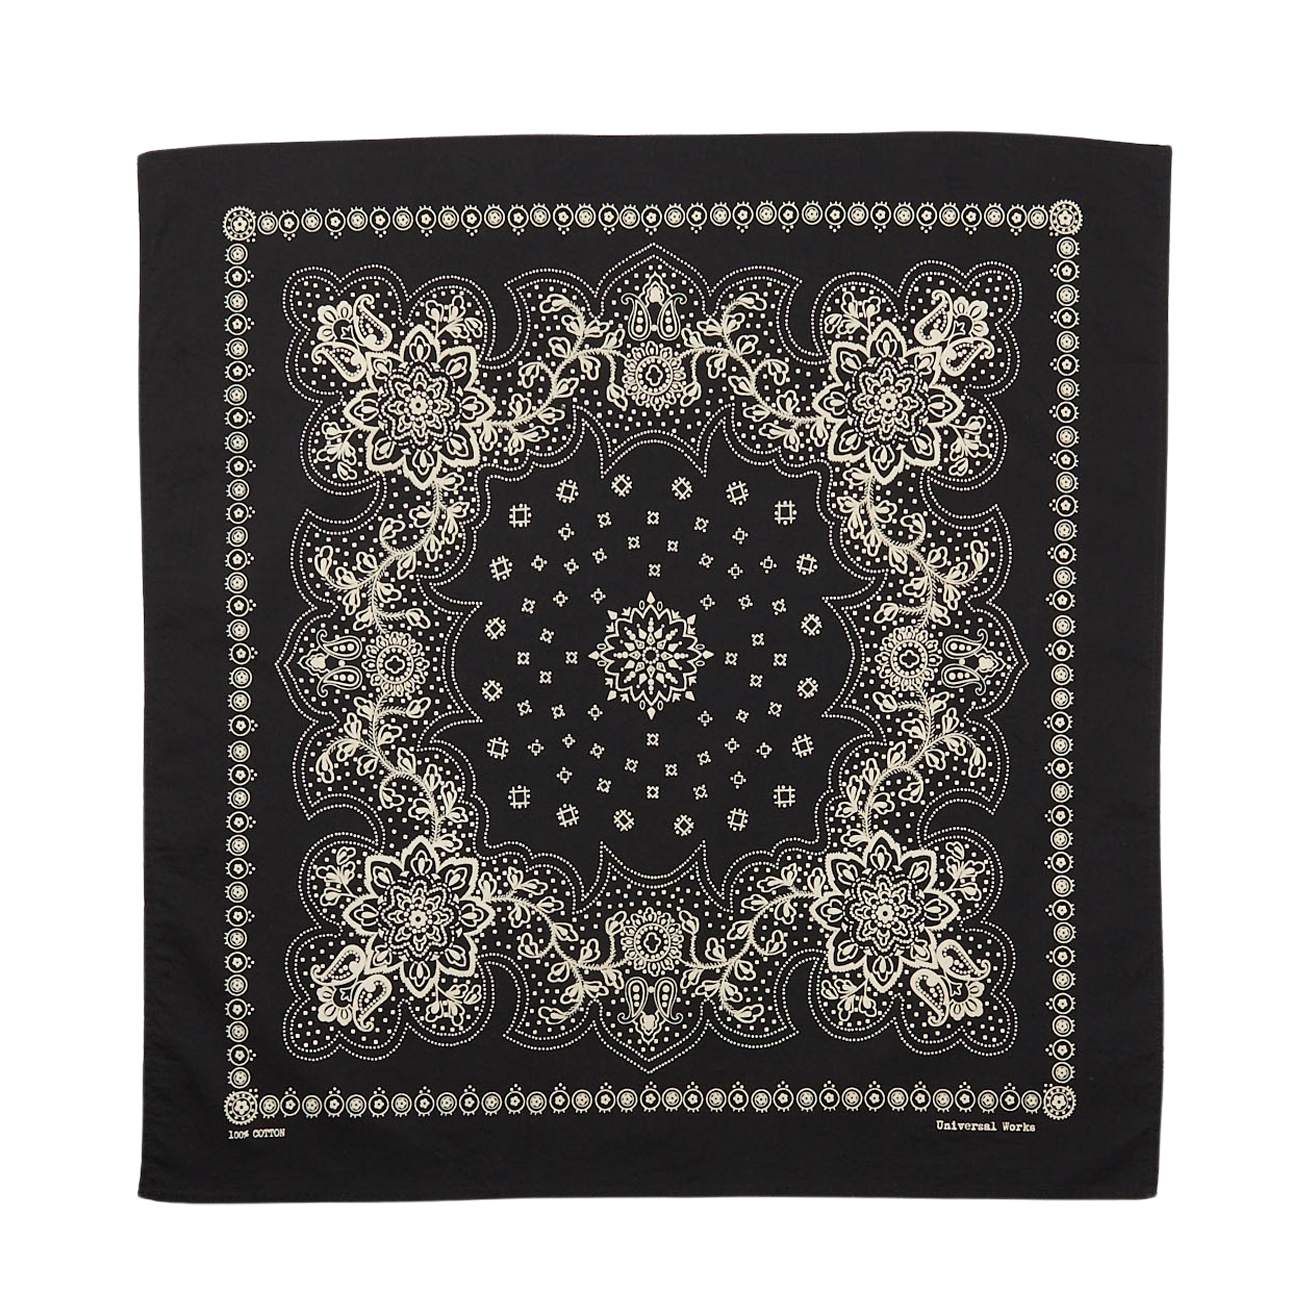 Universal Works Black Cotton Paisley Printed Bandana with intricate designs and border detailing.